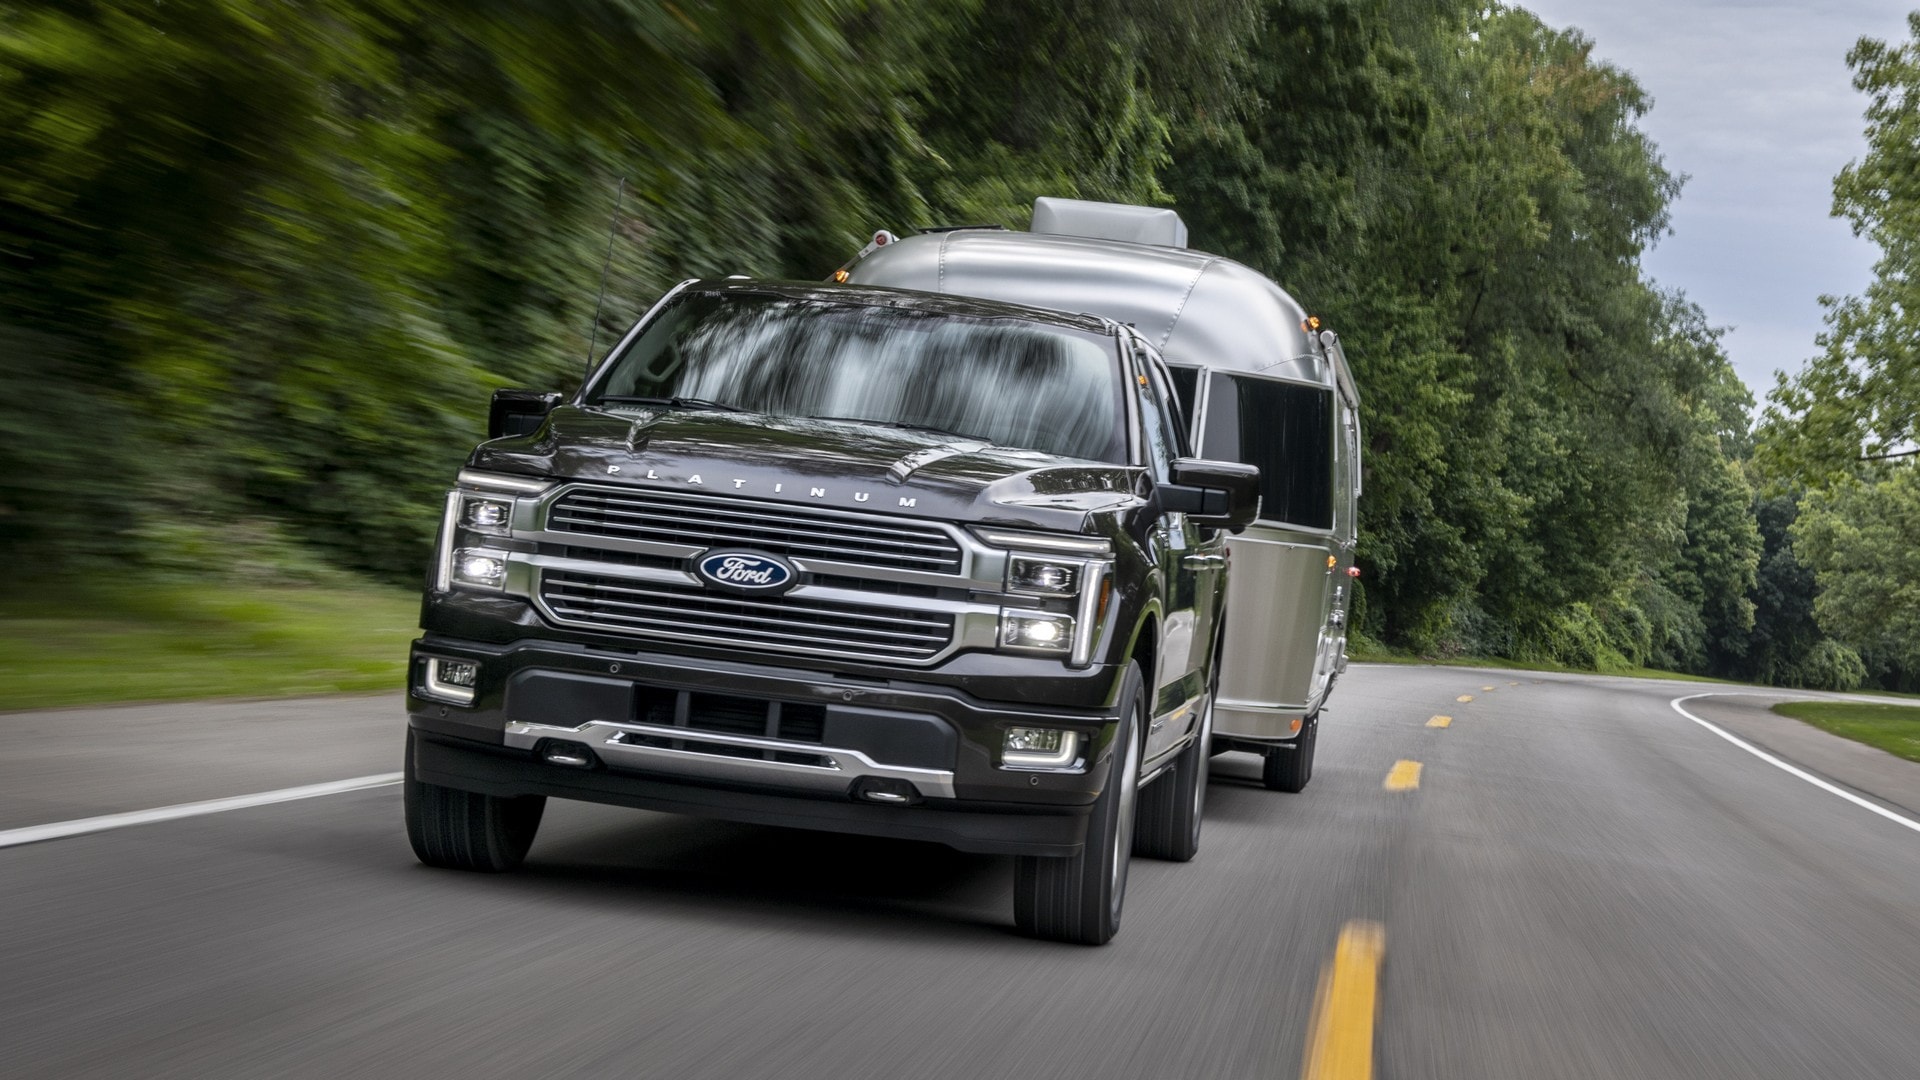 2024 Ford F-150 Truck Refresh Gets Imagined With All Possible Interior  Changes - autoevolution